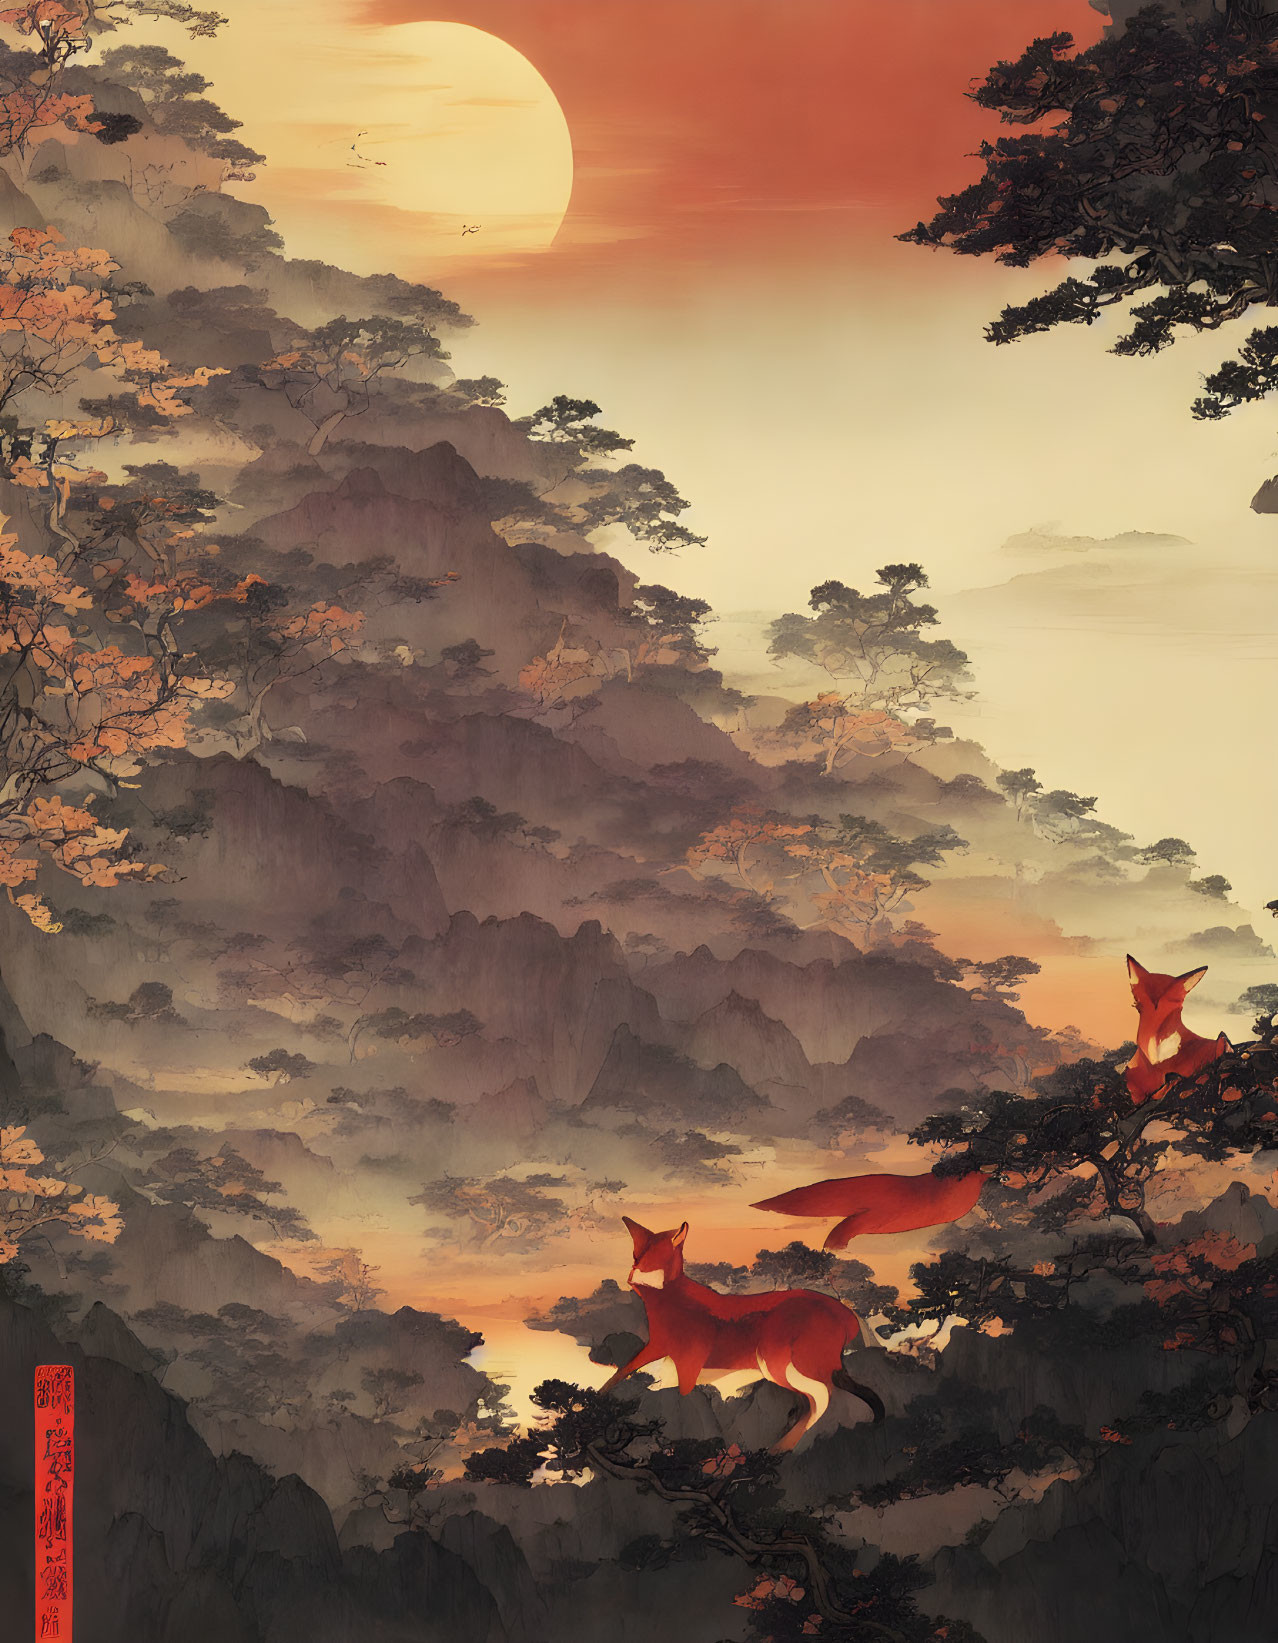 Traditional Asian-style painting: Red sun setting over misty mountains, silhouetted trees, and